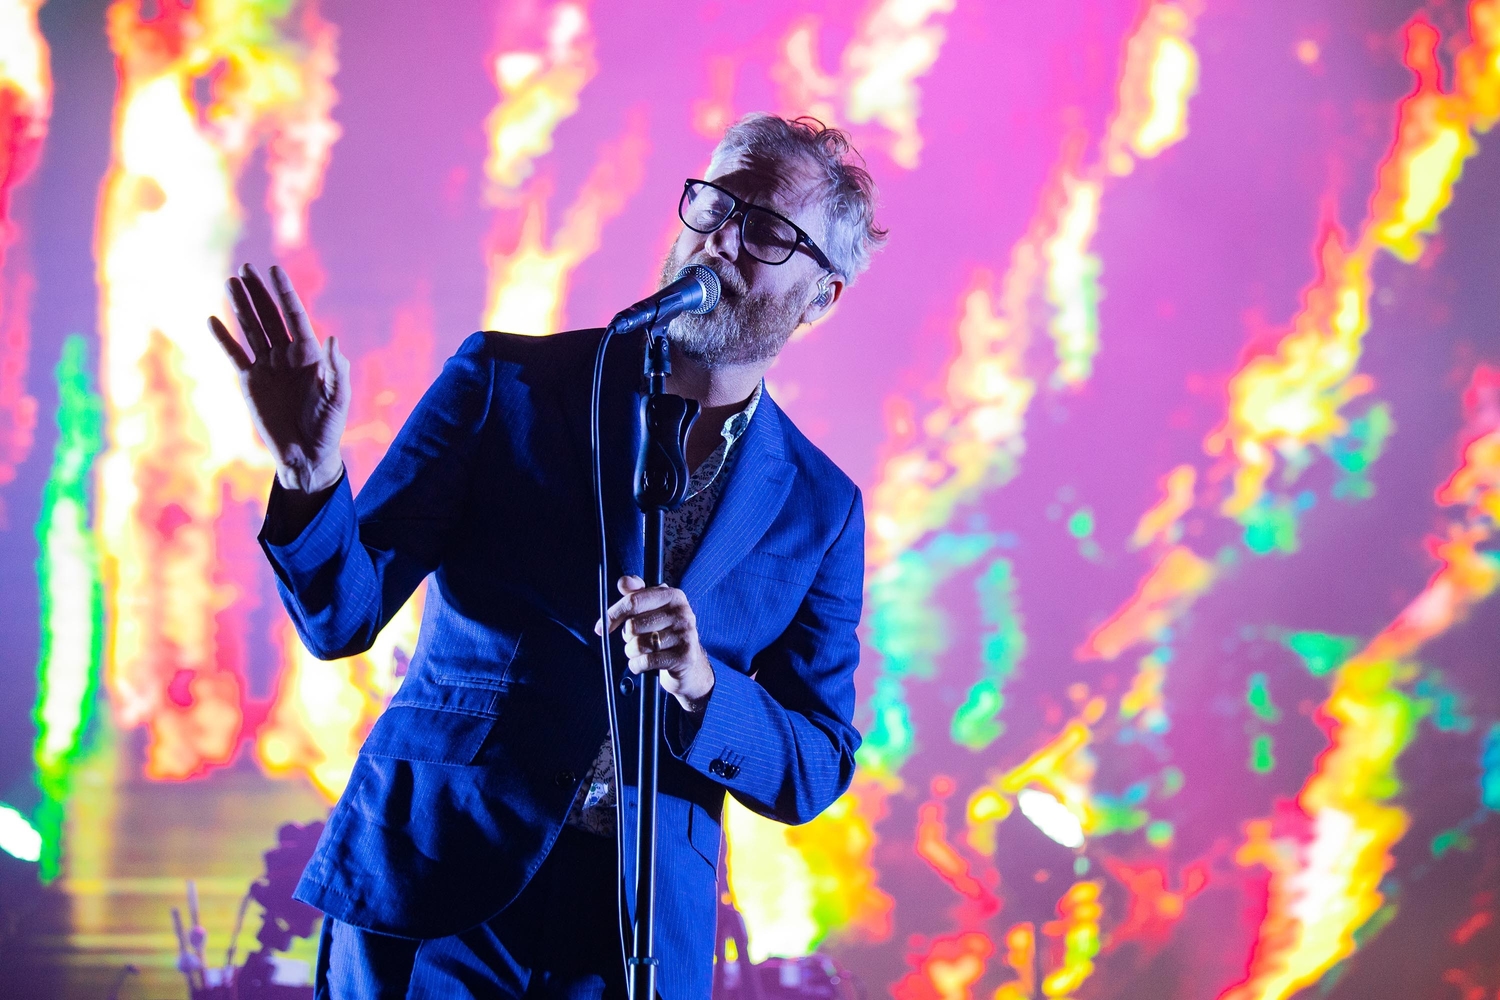 The National to play Ypsigrock 2019